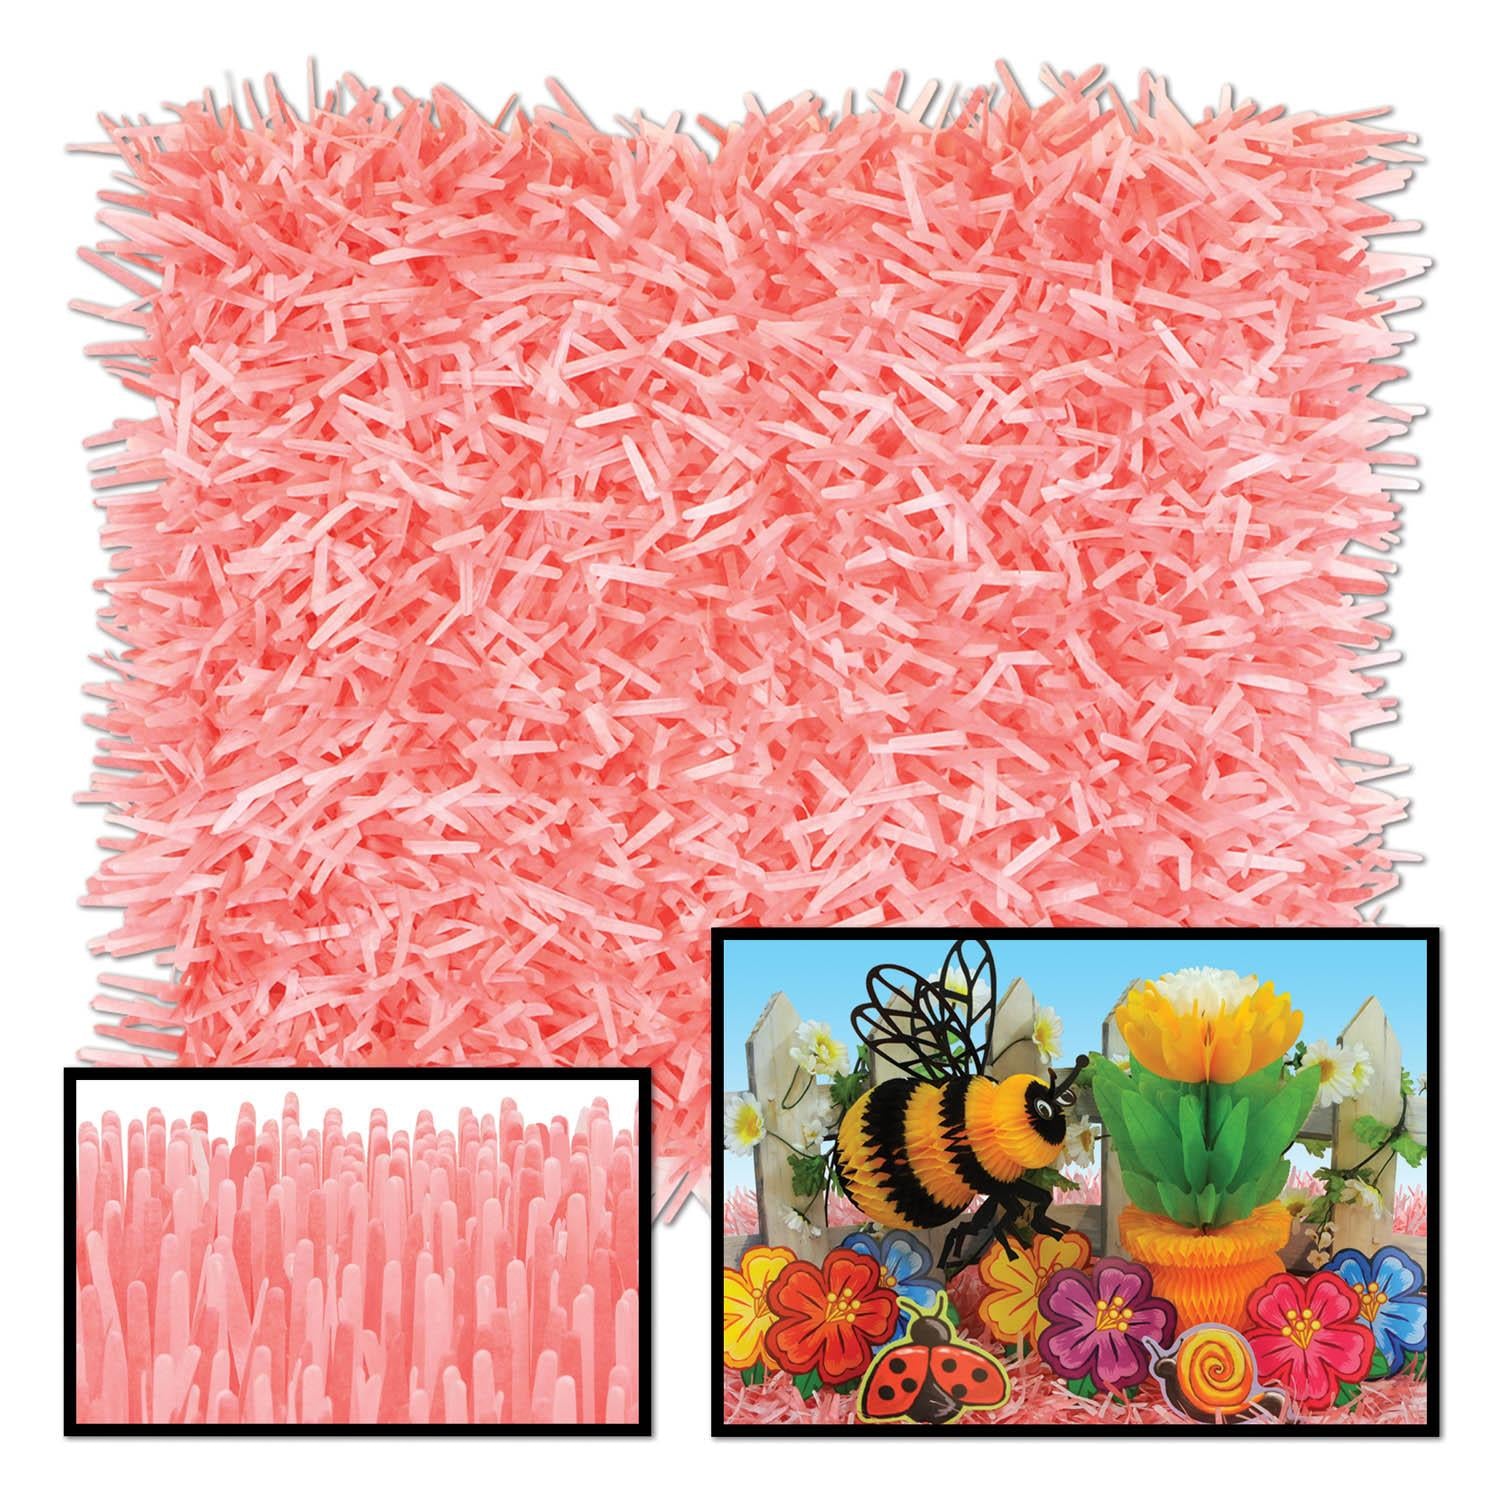 Packaged Fringed Party Tissue Mats - dusty rose & pink (2/Pkg)